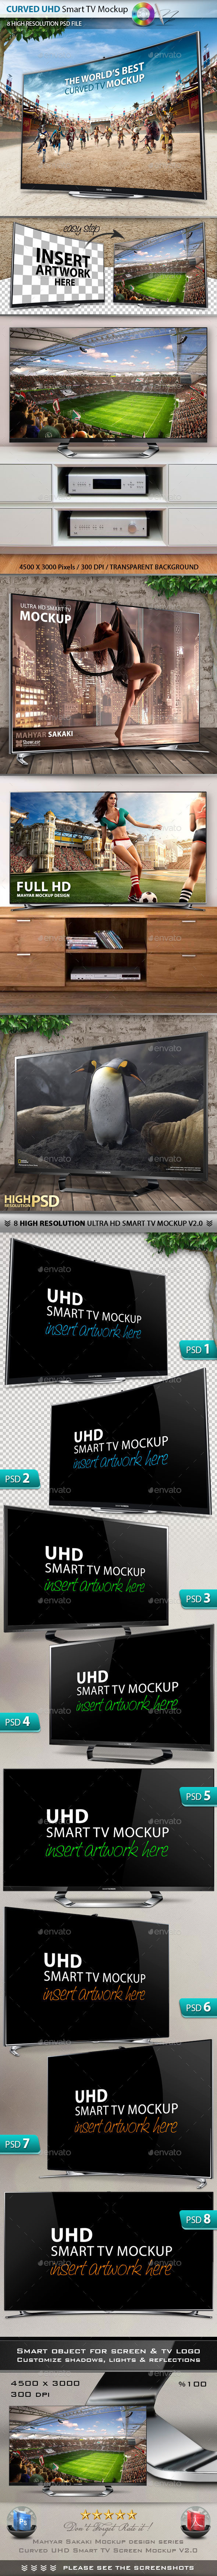 Uhdpreview